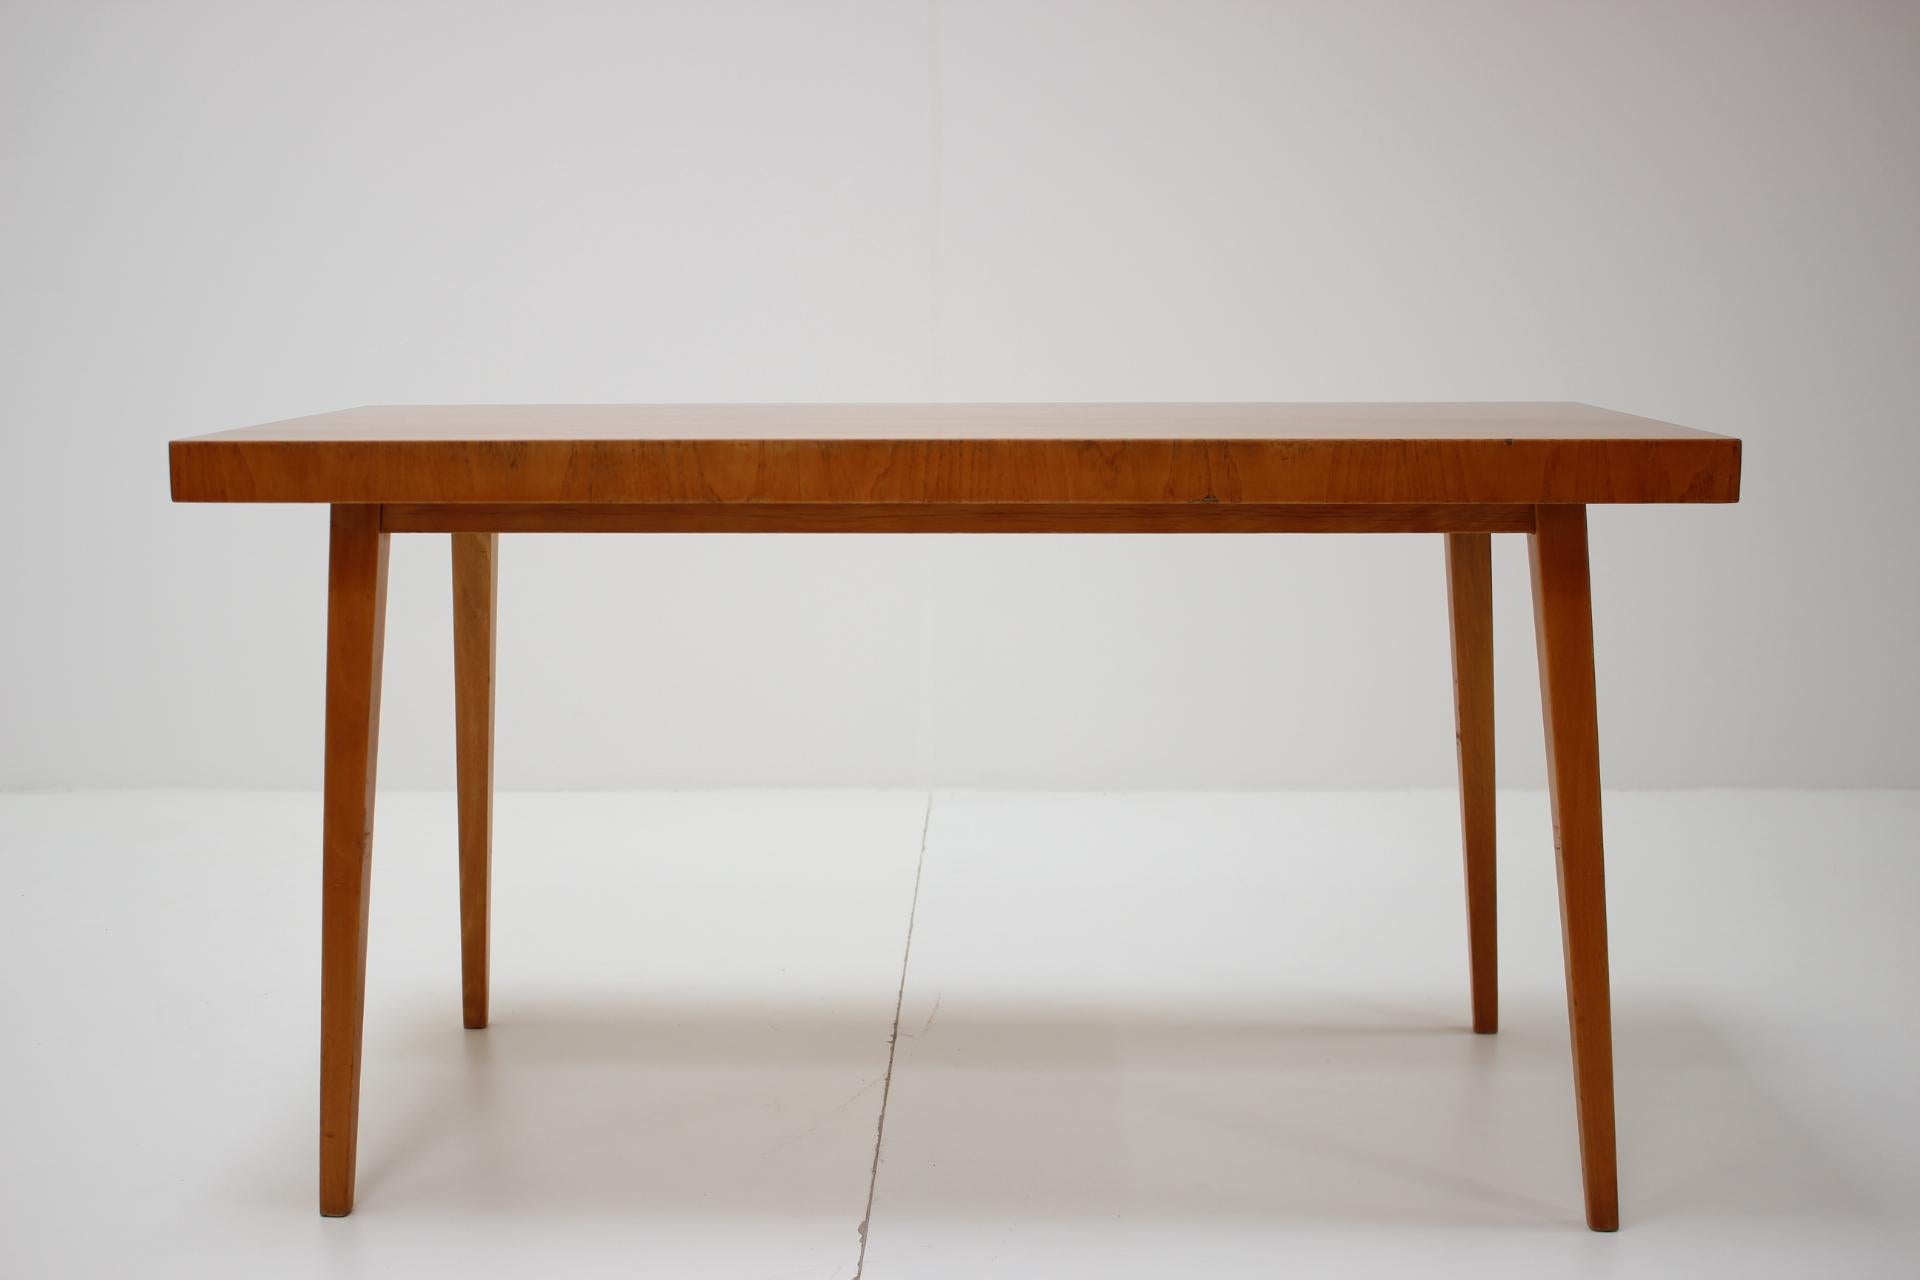 - Made in Czechoslovakia
- Made of walnut
- Has some signs use
- Good, original condition.